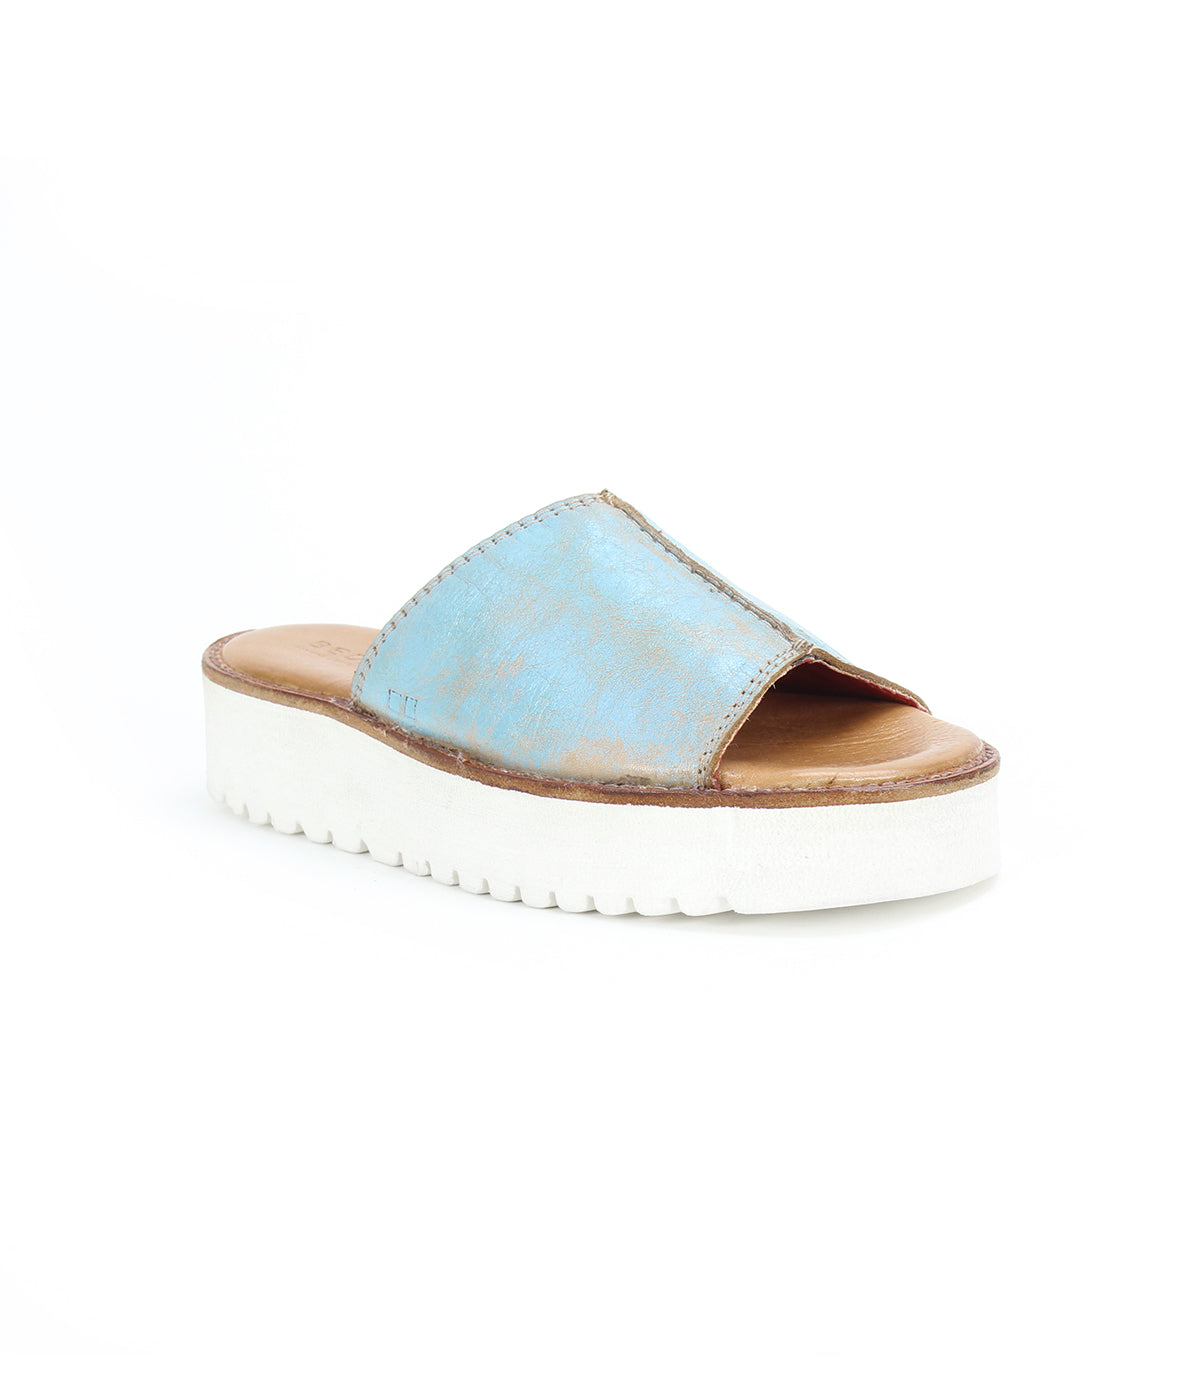 A stylish Fairlee II by Bed Stu blue and white leather slide sandal.